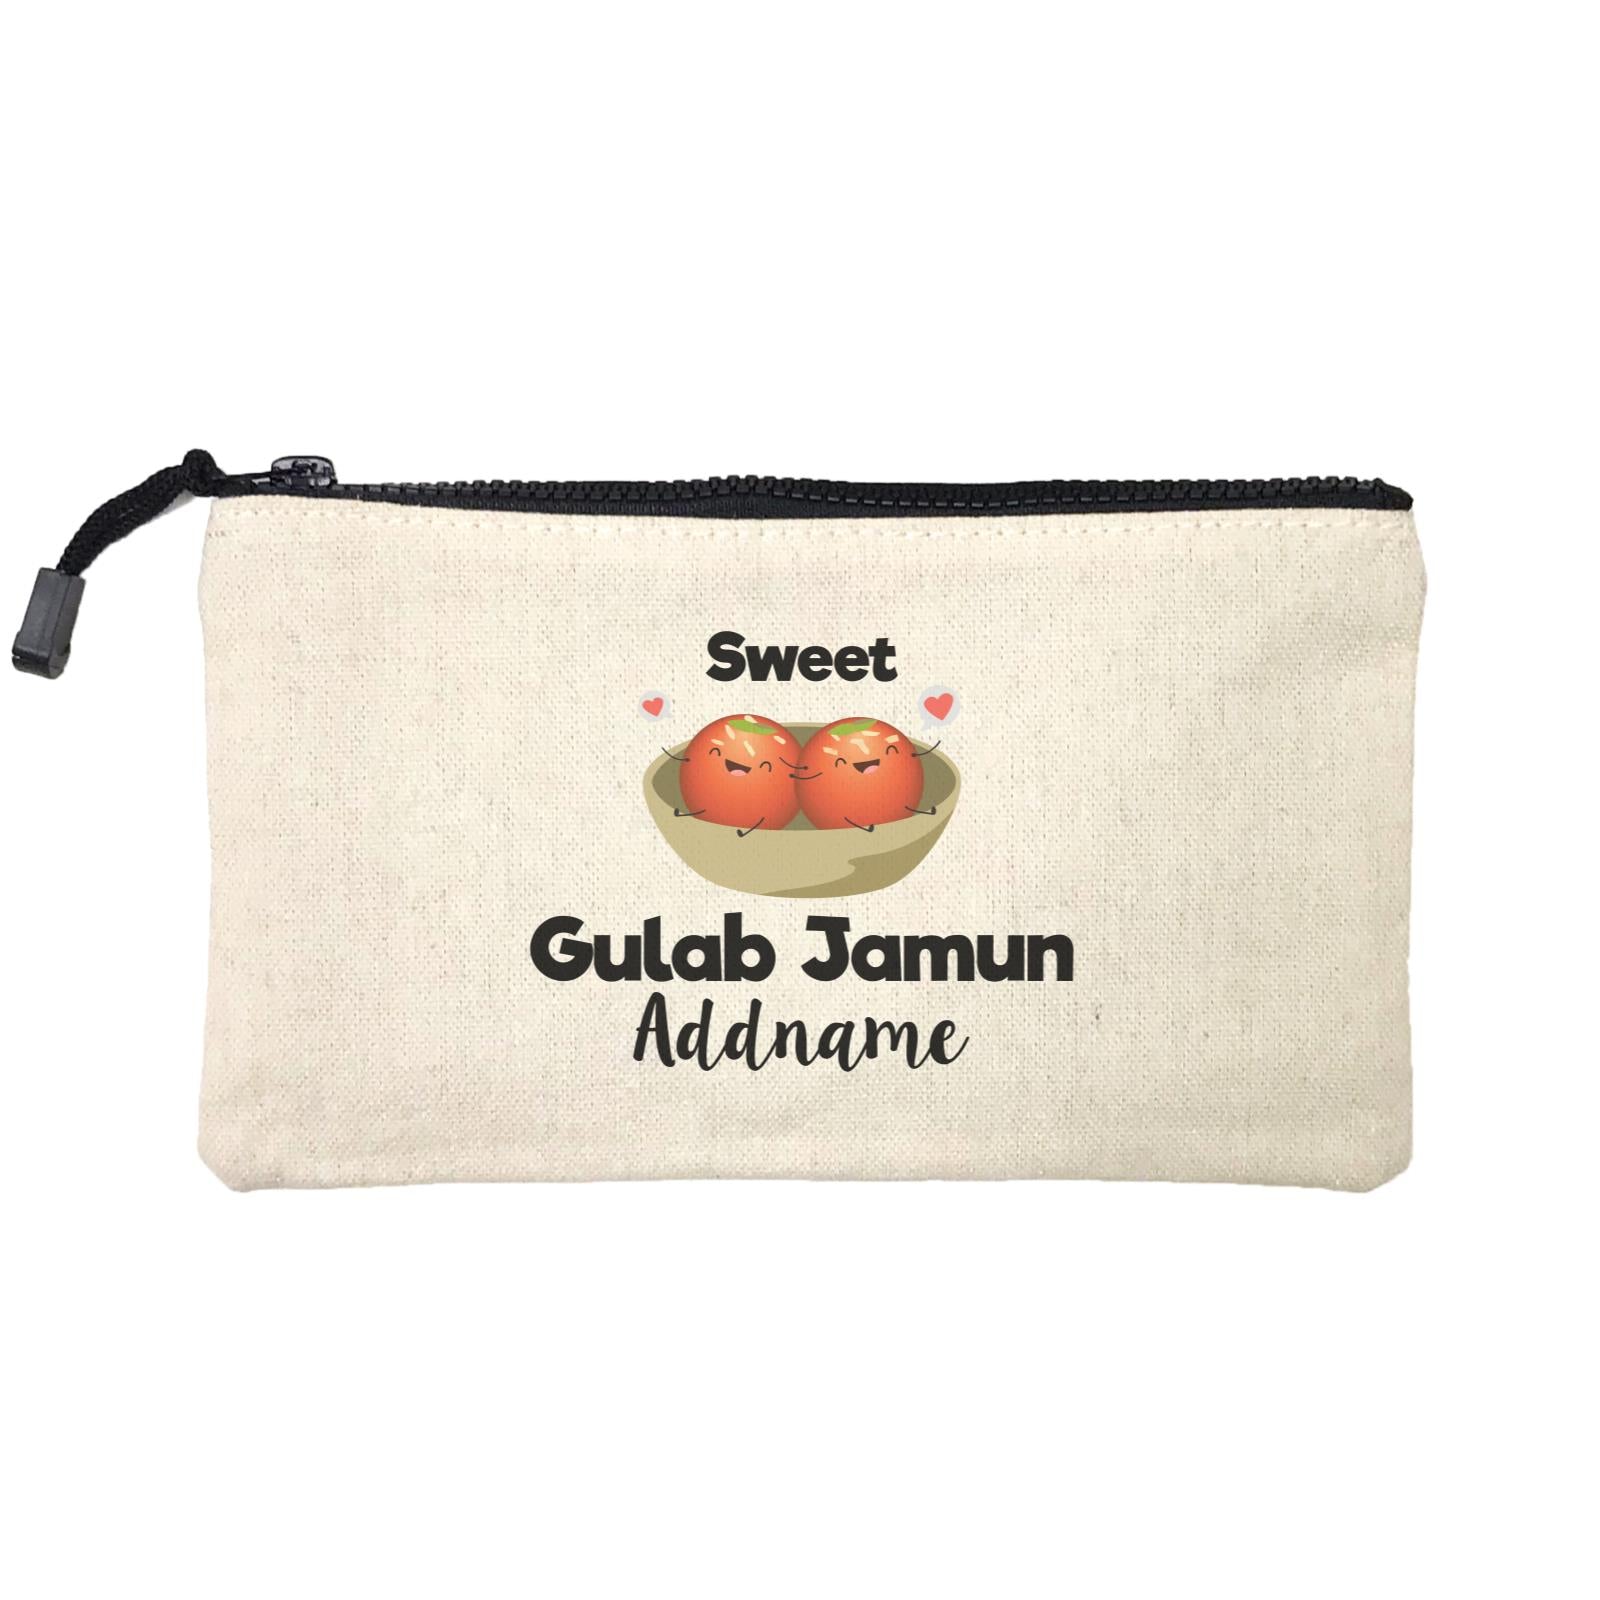 Sweet Gulab Jamun Addname Mini Accessories Stationery Pouch